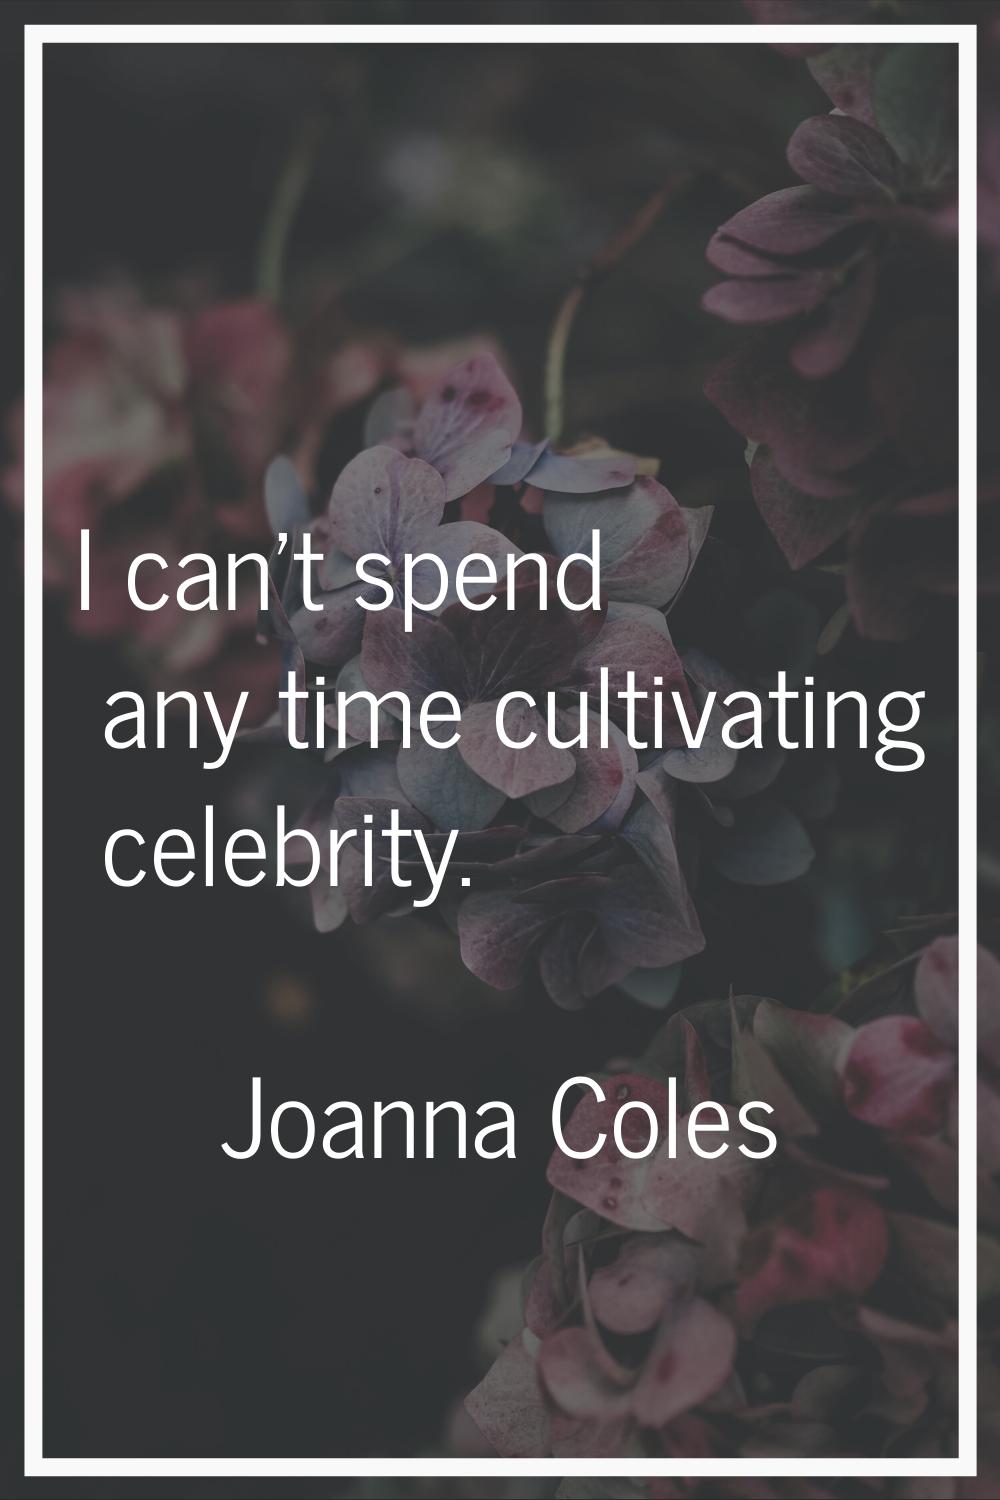 I can't spend any time cultivating celebrity.